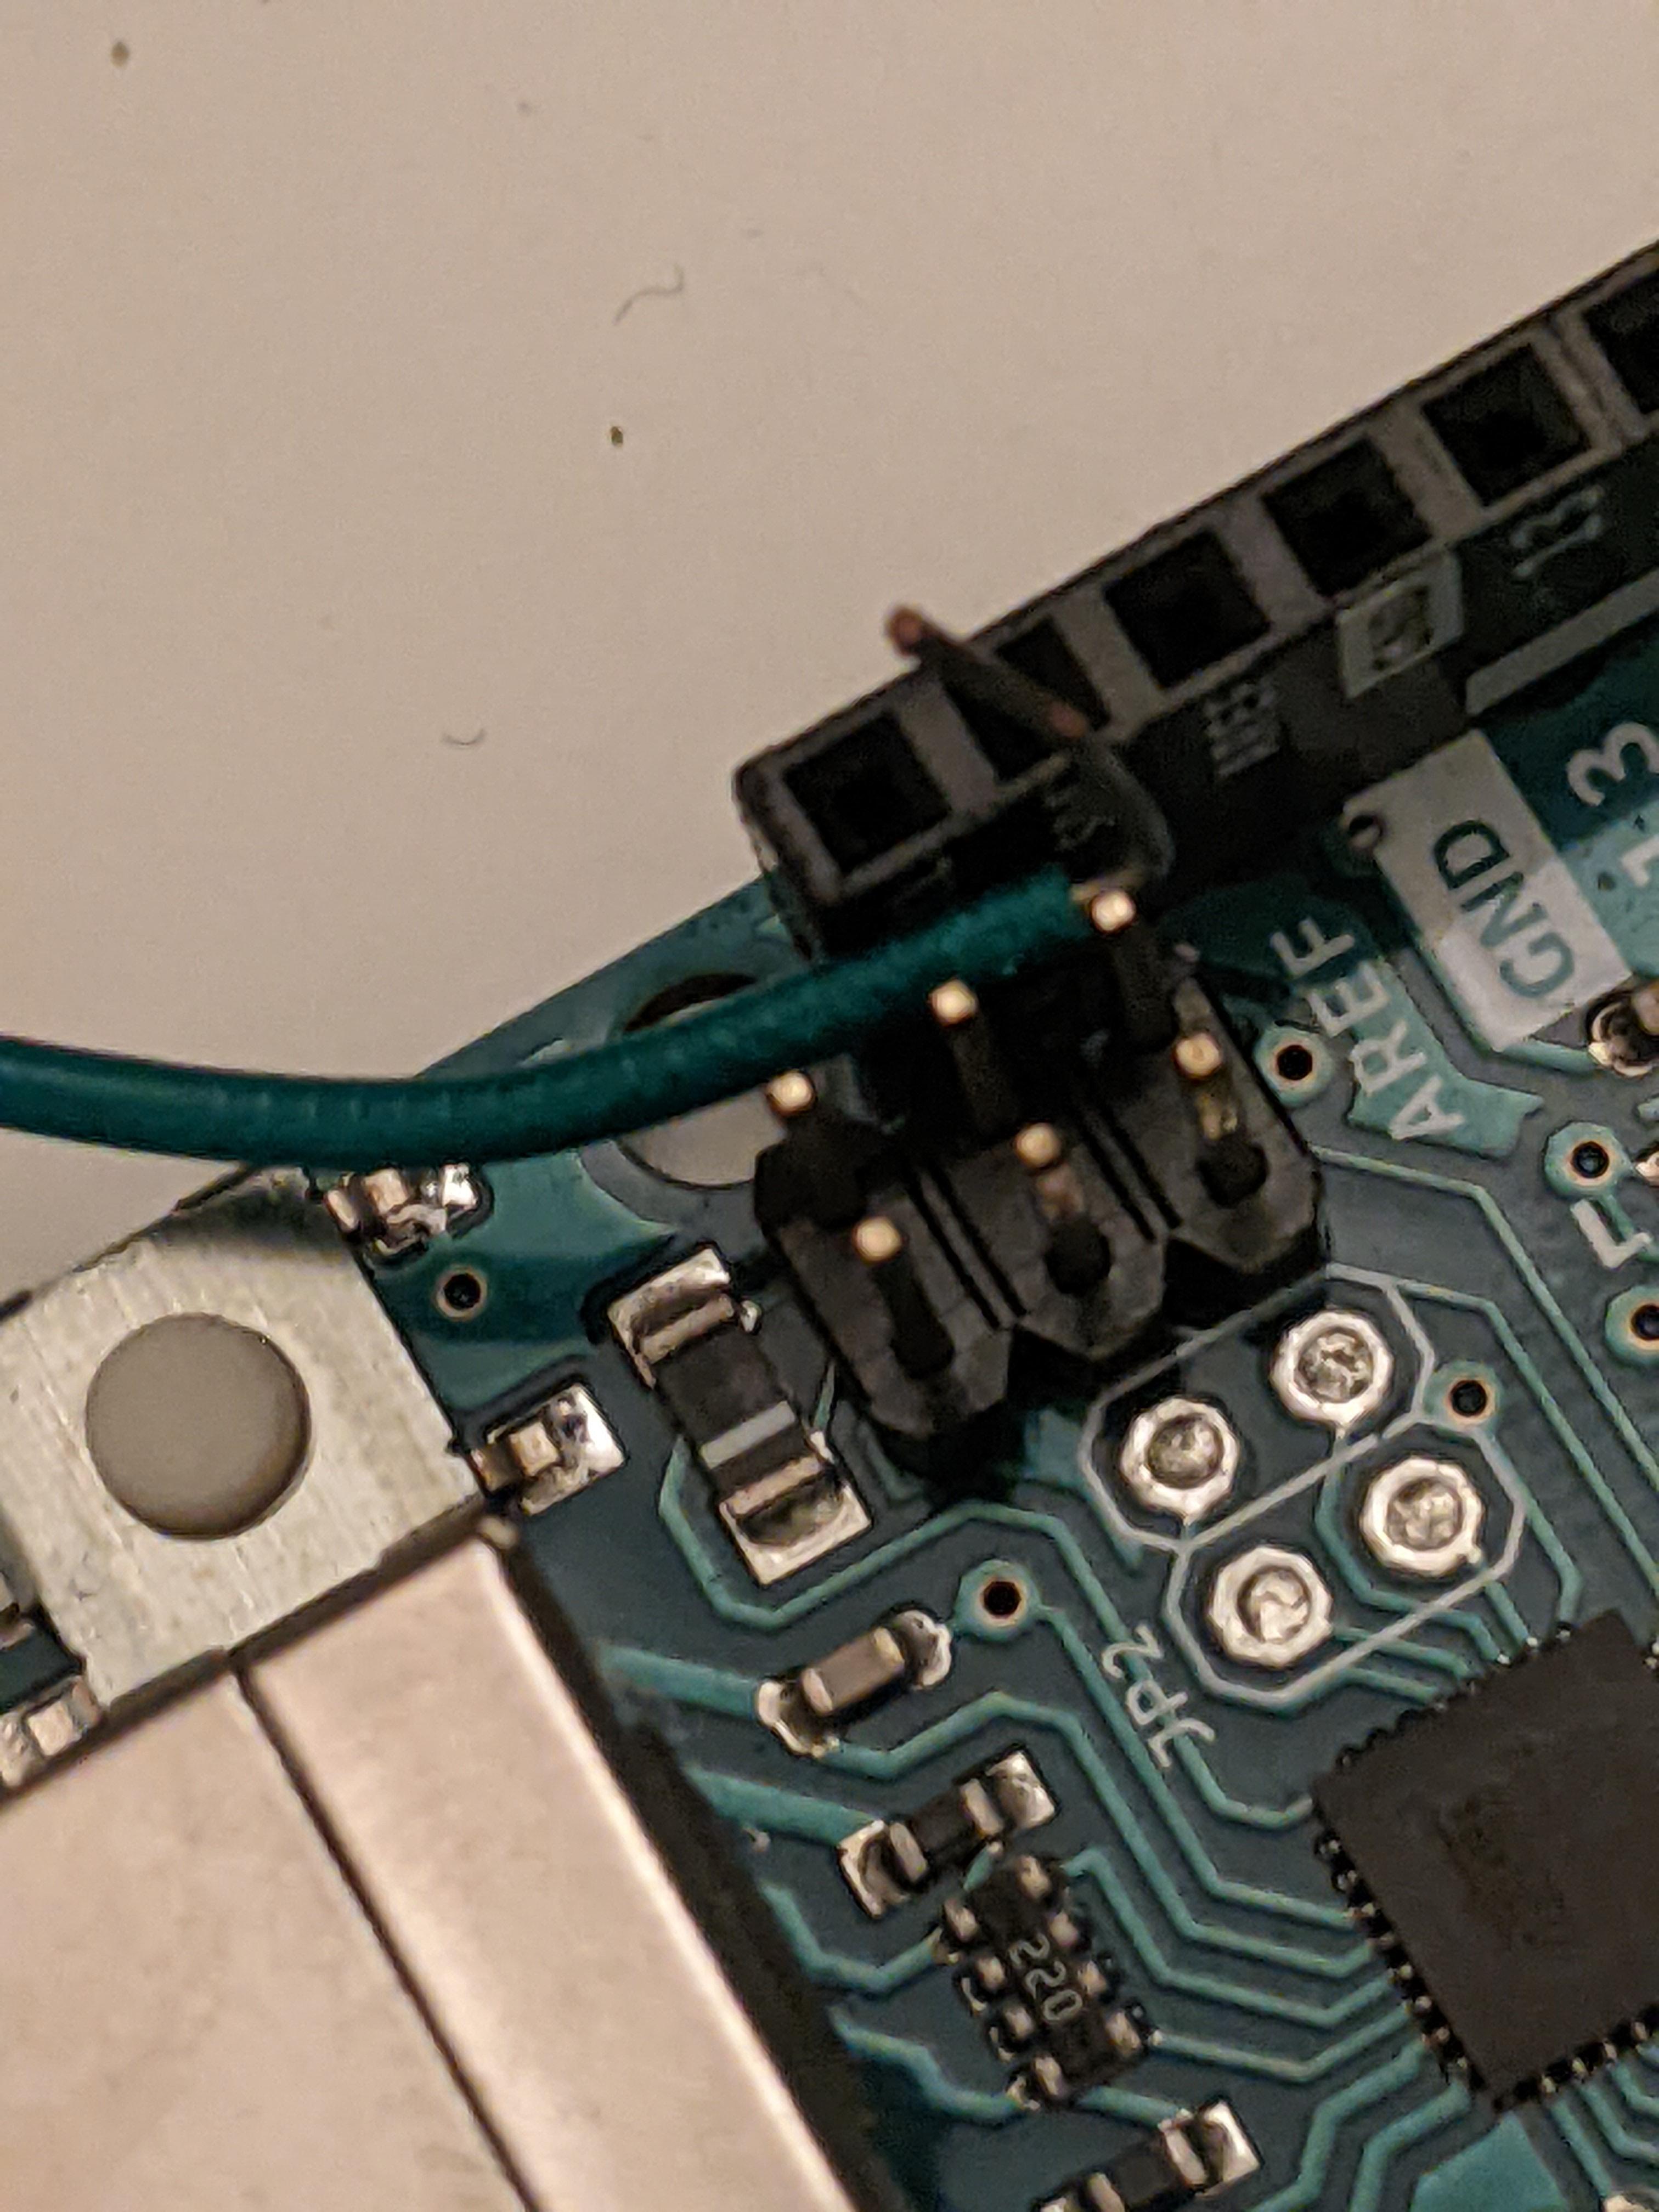 A wire improperly connected to an Arduino using only the power of friendship.